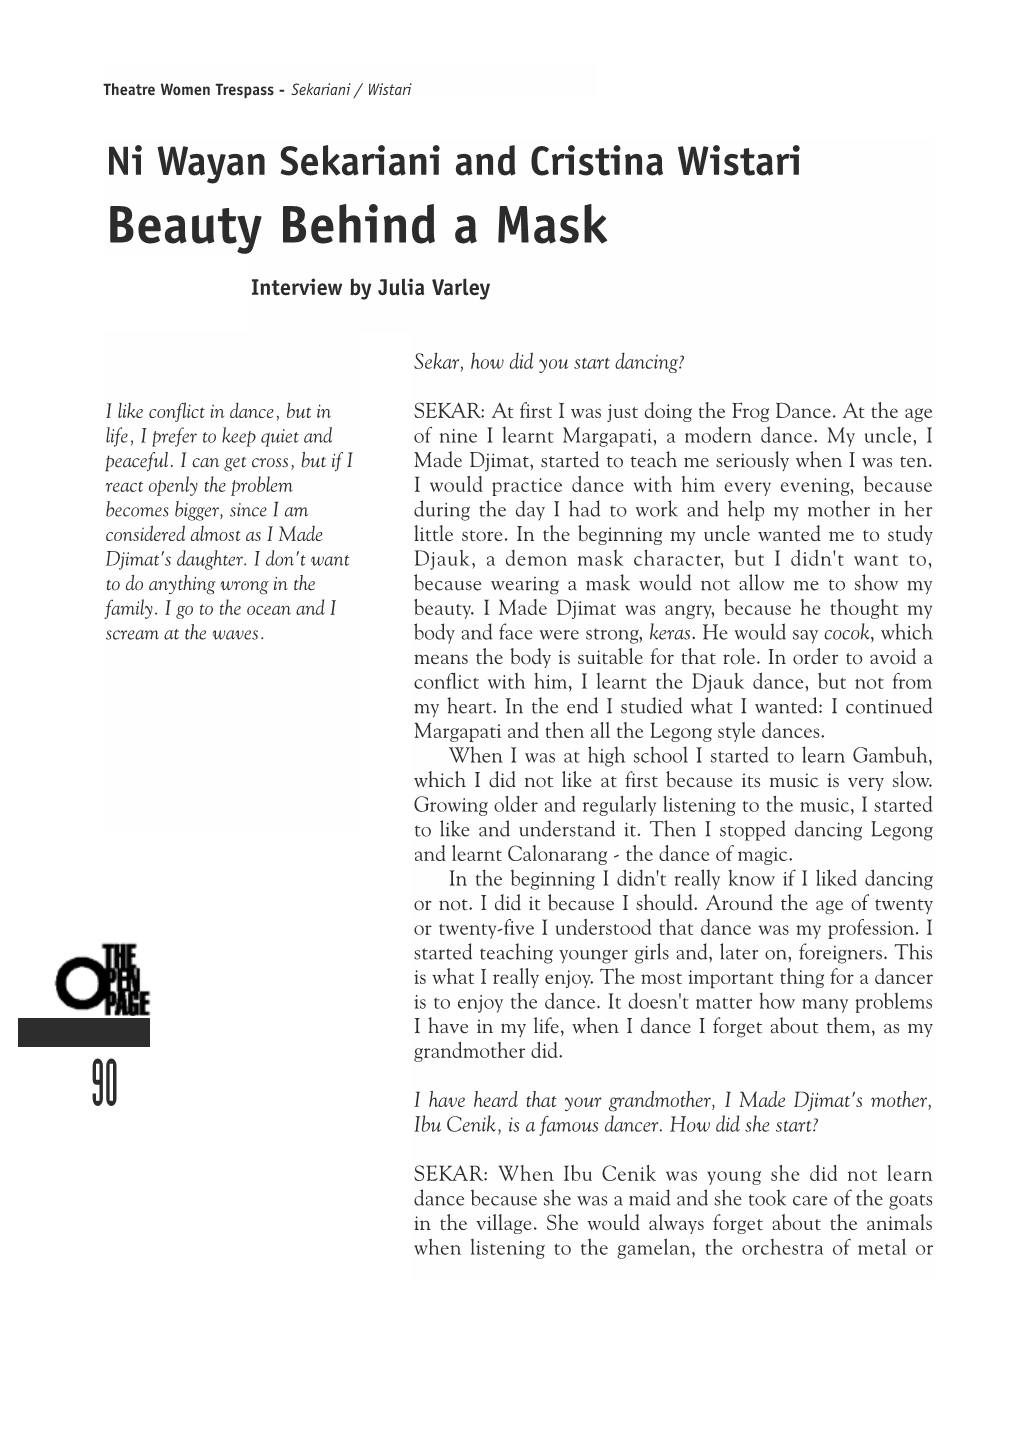 Beauty Behind a Mask Interview by Julia Varley